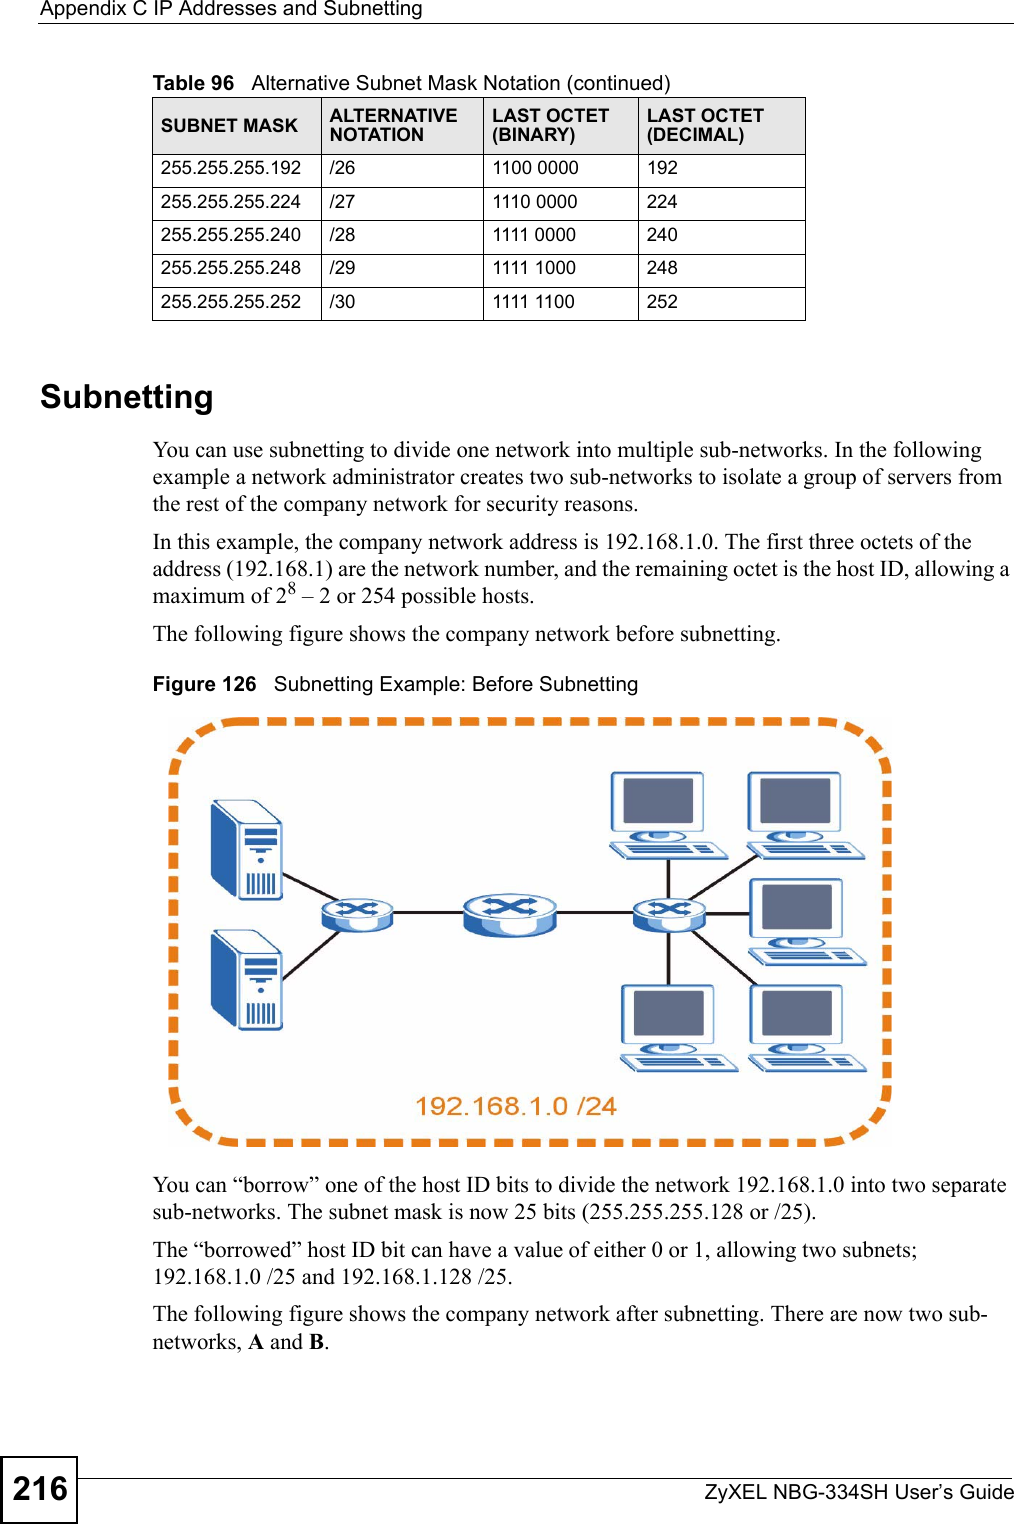 Appendix C IP Addresses and SubnettingZyXEL NBG-334SH User’s Guide216SubnettingYou can use subnetting to divide one network into multiple sub-networks. In the following example a network administrator creates two sub-networks to isolate a group of servers from the rest of the company network for security reasons.In this example, the company network address is 192.168.1.0. The first three octets of the address (192.168.1) are the network number, and the remaining octet is the host ID, allowing a maximum of 28 – 2 or 254 possible hosts.The following figure shows the company network before subnetting.  Figure 126   Subnetting Example: Before SubnettingYou can “borrow” one of the host ID bits to divide the network 192.168.1.0 into two separate sub-networks. The subnet mask is now 25 bits (255.255.255.128 or /25).The “borrowed” host ID bit can have a value of either 0 or 1, allowing two subnets; 192.168.1.0 /25 and 192.168.1.128 /25. The following figure shows the company network after subnetting. There are now two sub-networks, A and B. 255.255.255.192 /26 1100 0000 192255.255.255.224 /27 1110 0000 224255.255.255.240 /28 1111 0000 240255.255.255.248 /29 1111 1000 248255.255.255.252 /30 1111 1100 252Table 96   Alternative Subnet Mask Notation (continued)SUBNET MASK ALTERNATIVE NOTATIONLAST OCTET (BINARY)LAST OCTET (DECIMAL)